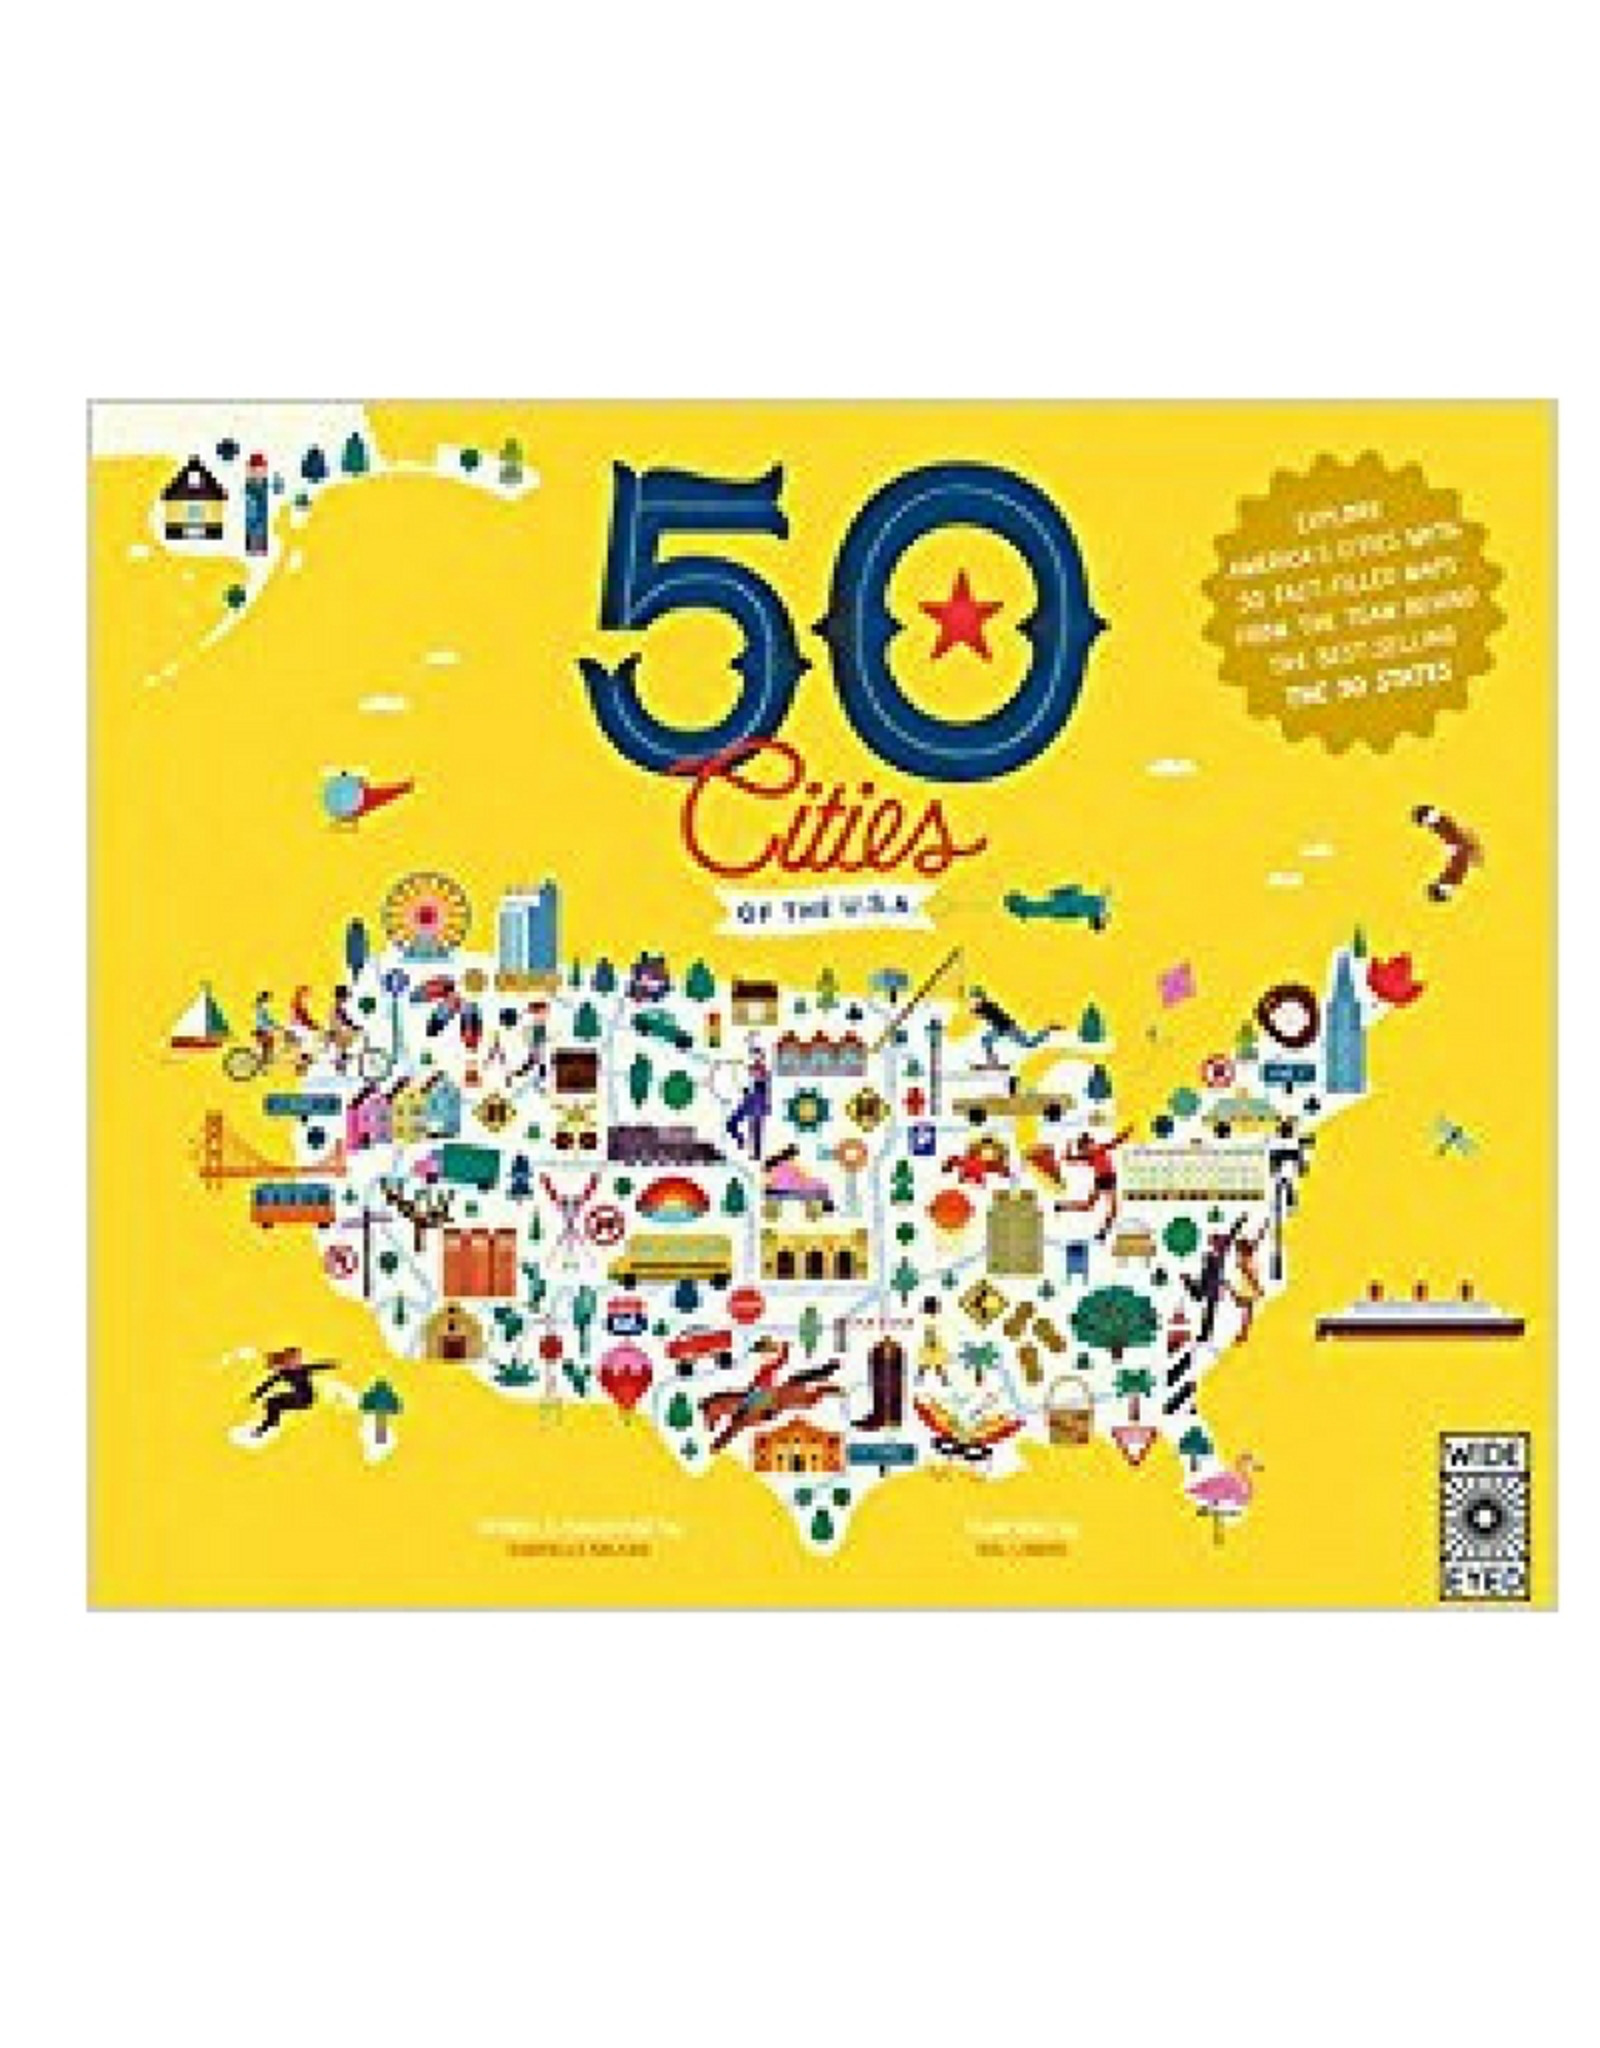 50 Cities of the U.S.A by Gabrielle Balkan